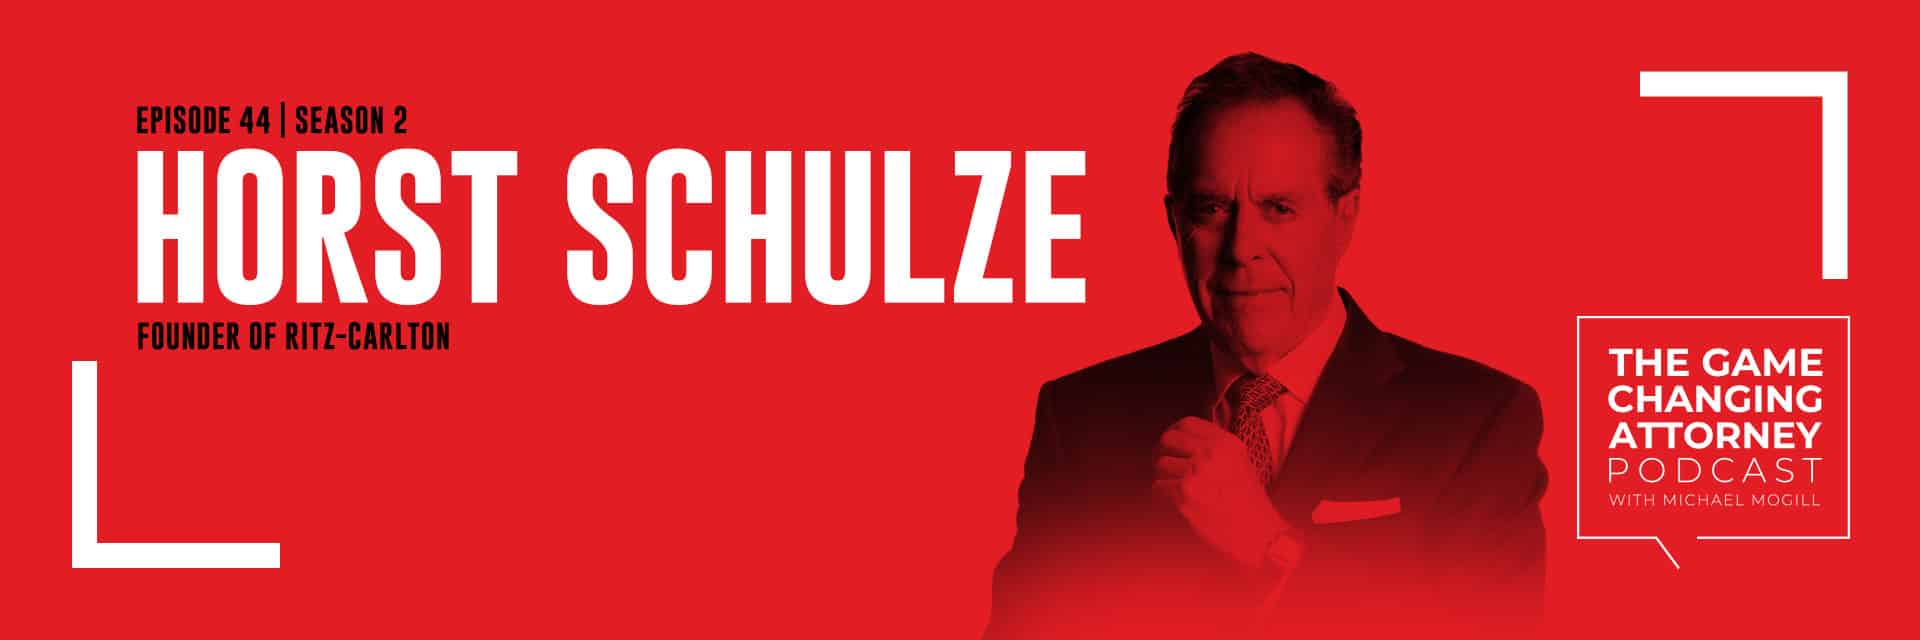 Horst Schulze - The Game Changing Attorney Podcast - Desktop